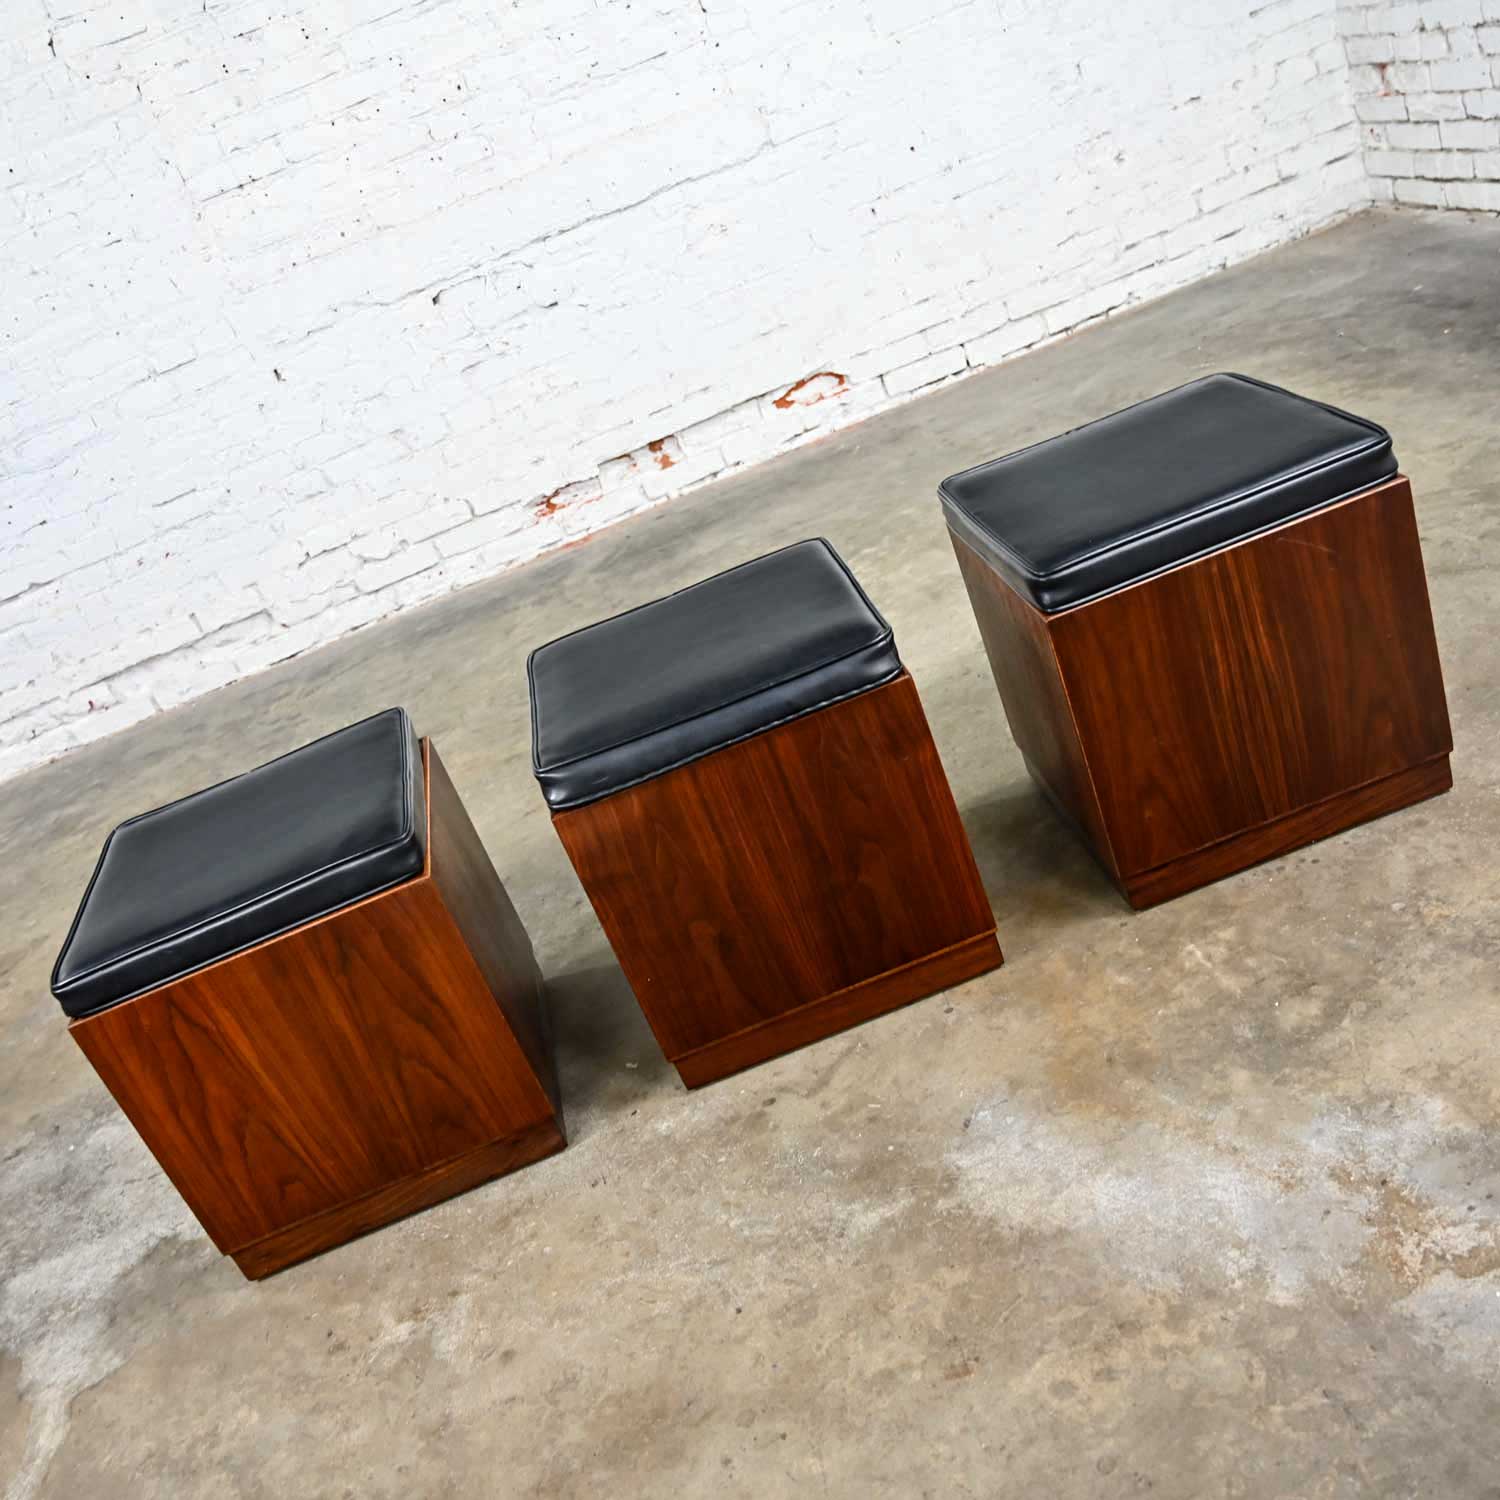 Mid-Century Modern Trio Square Walnut Cube Stools Black Upholstered Tops by Jack Cartwright for Founders Furniture Patterns 7 Line